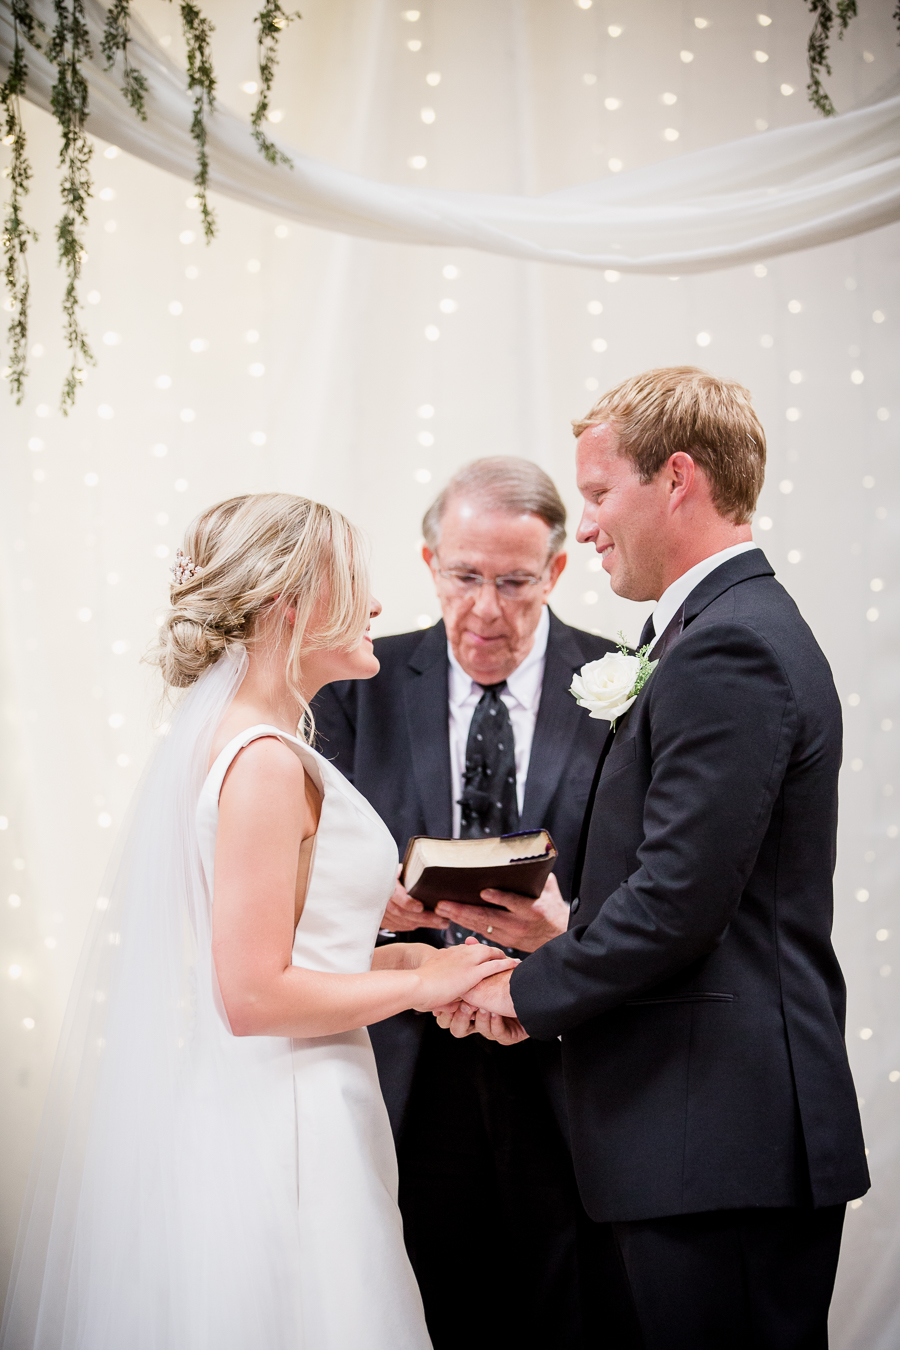 Holding hands during ceremony at this wedding at The Standard by Knoxville Wedding Photographer, Amanda May Photos.